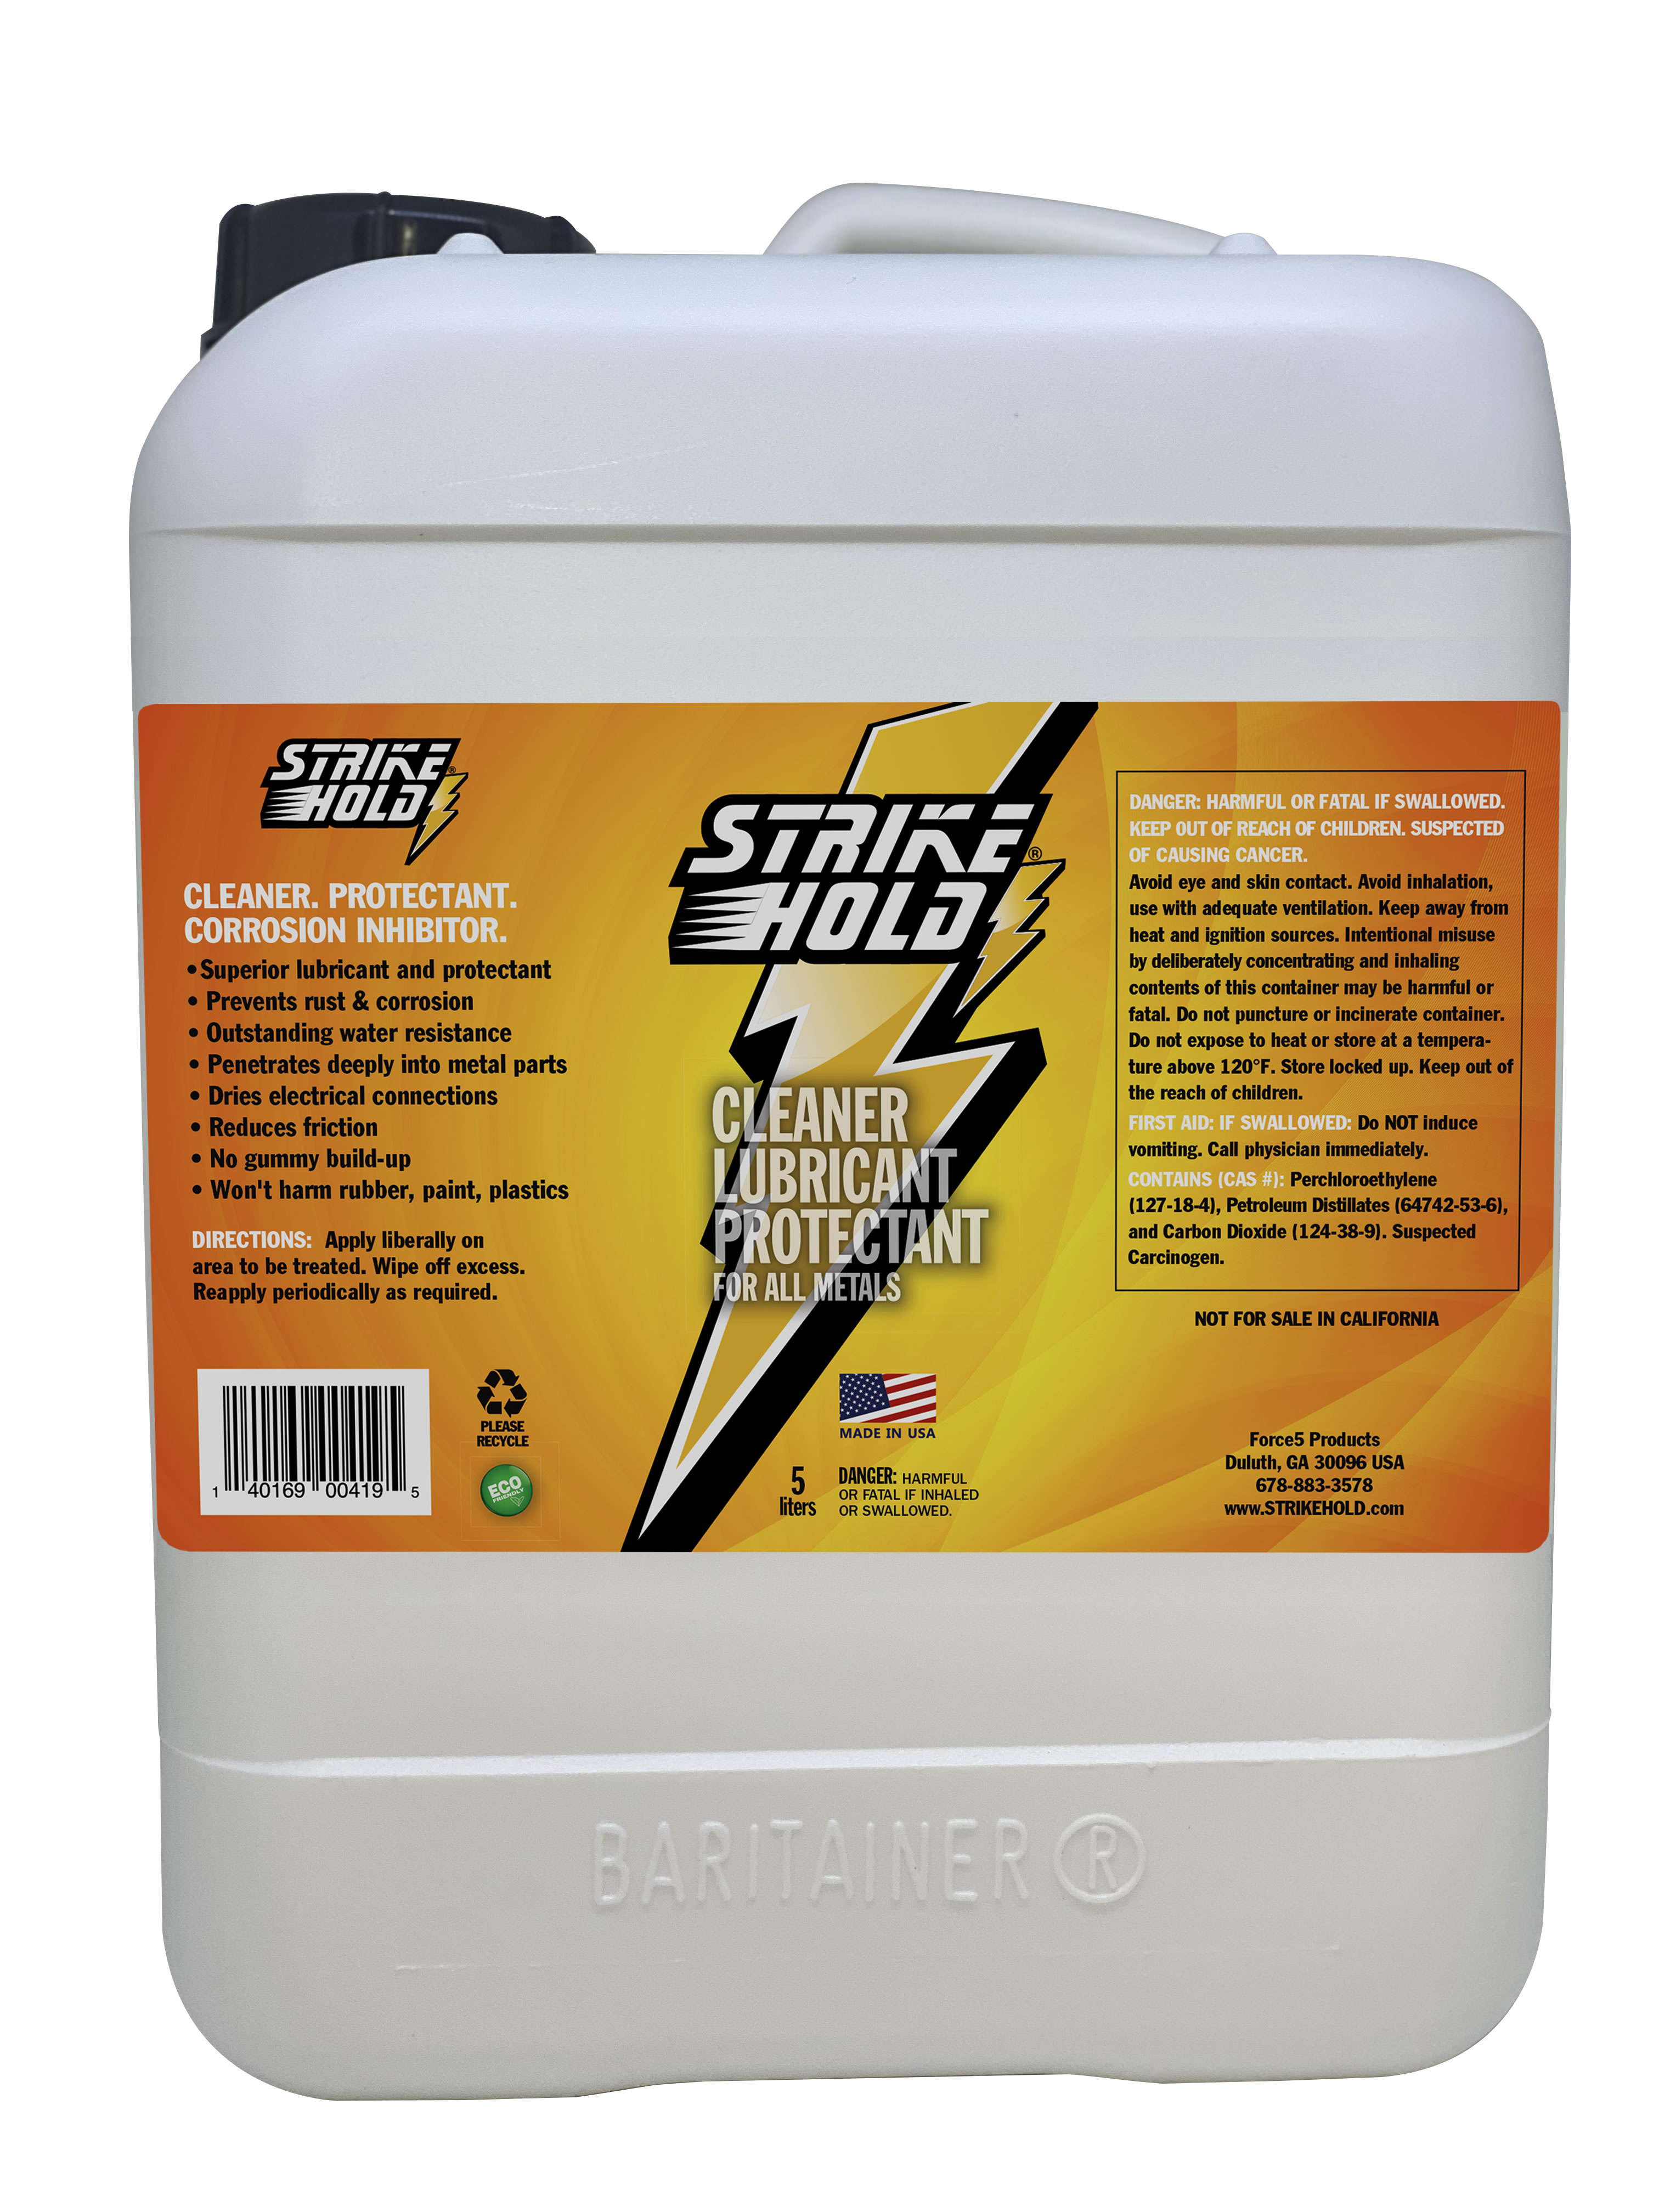 New Product: StrikeHold Protectant